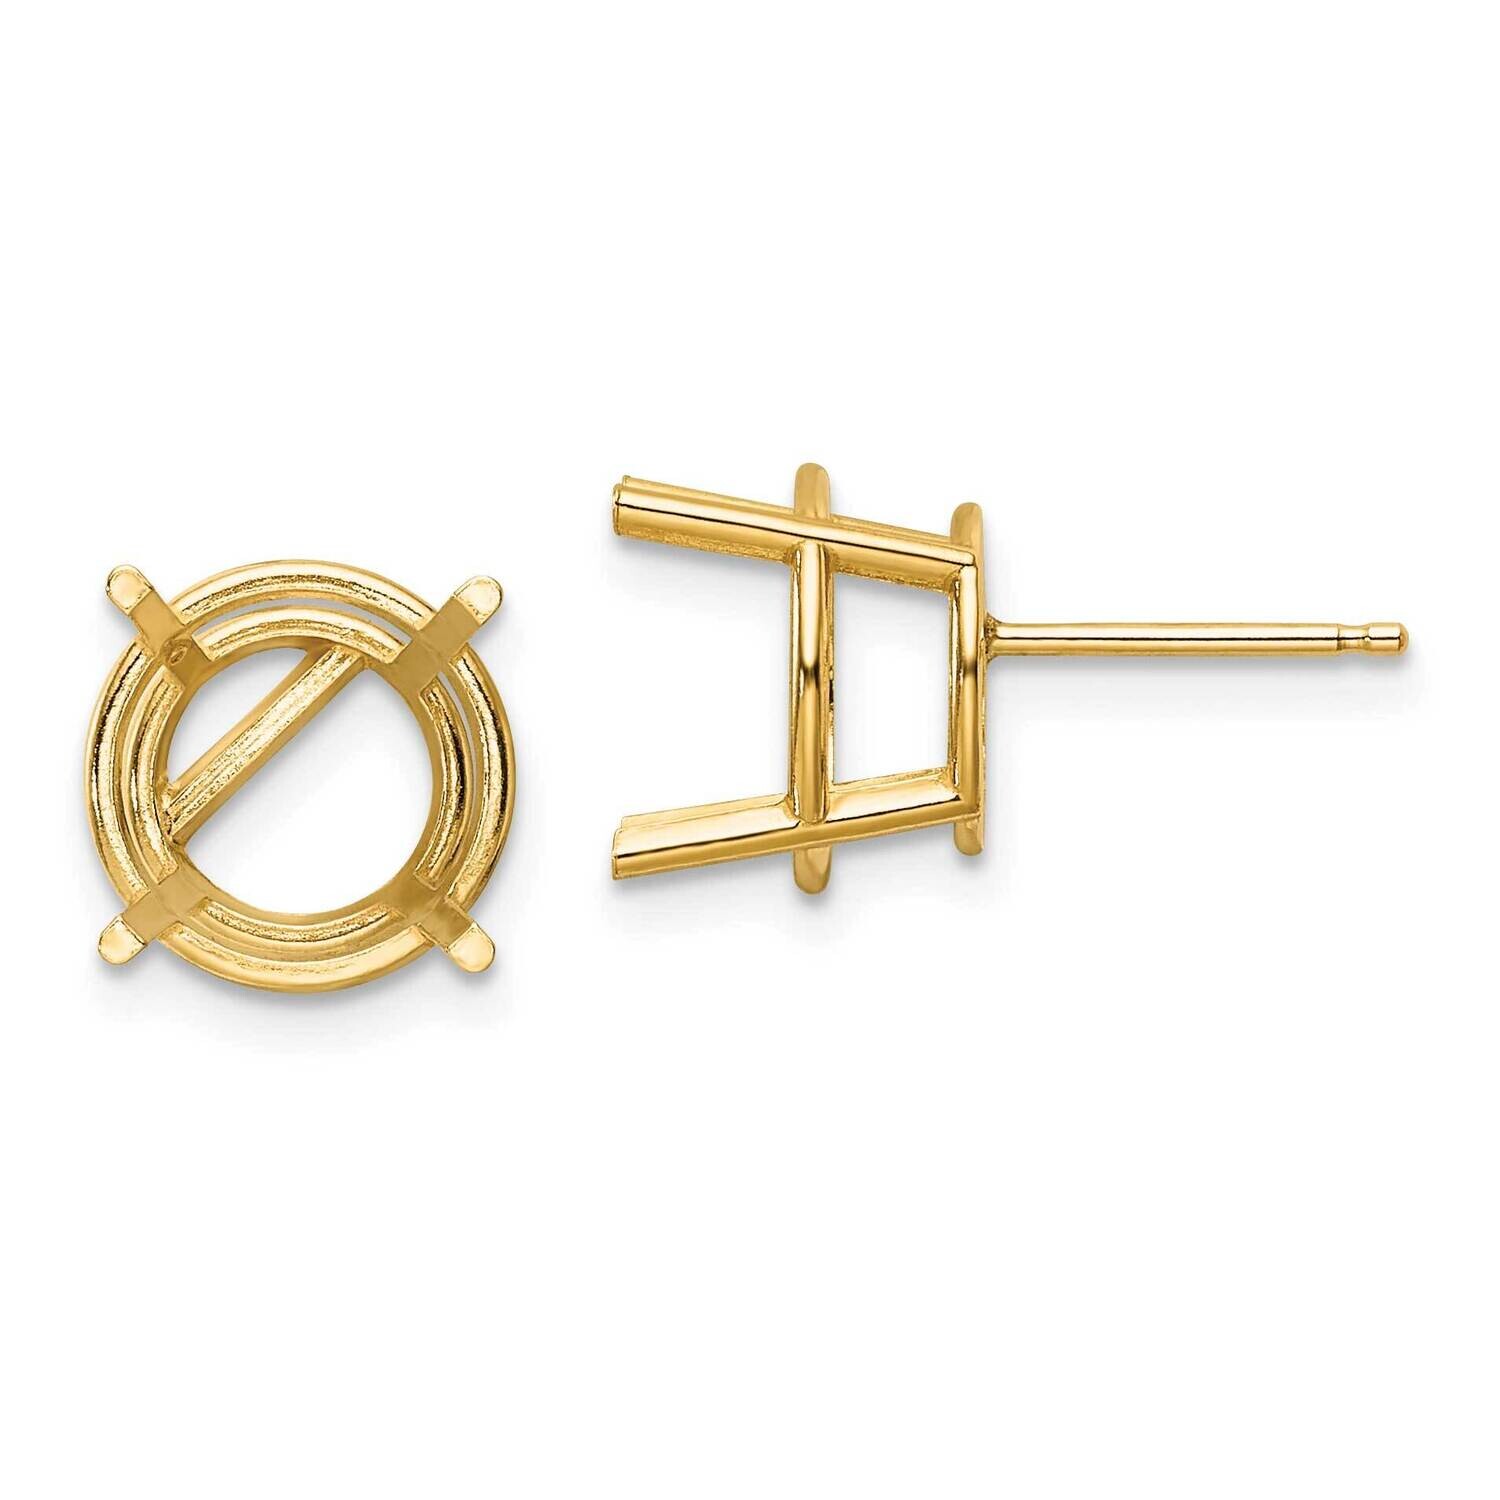 10mm Round Earring Mountings 14k Gold XE77